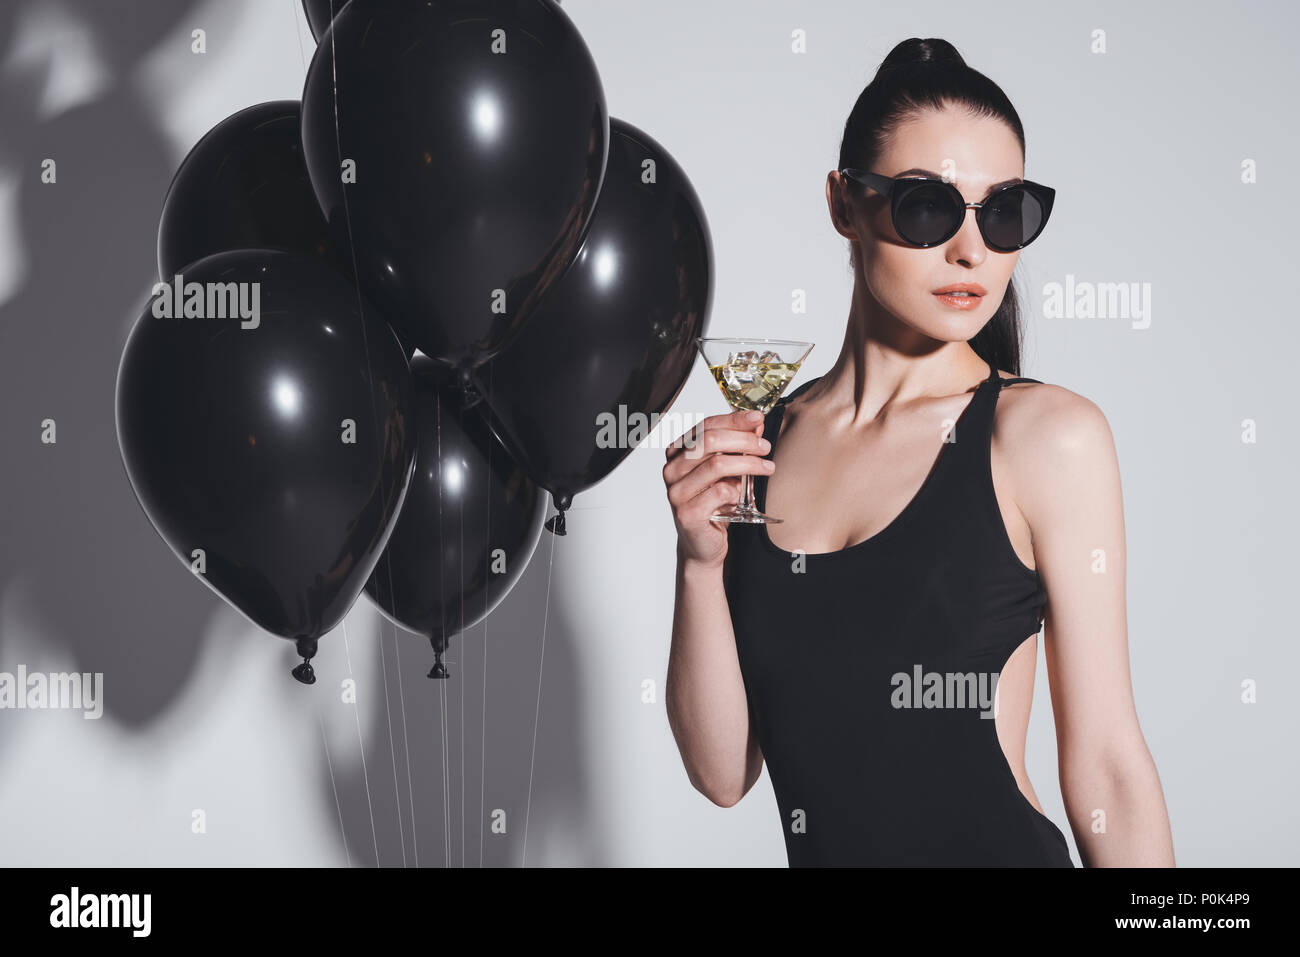 Gorgeous young woman in sunglasses and swimsuit drinking martini while standing in studio with black balloons Stock Photo